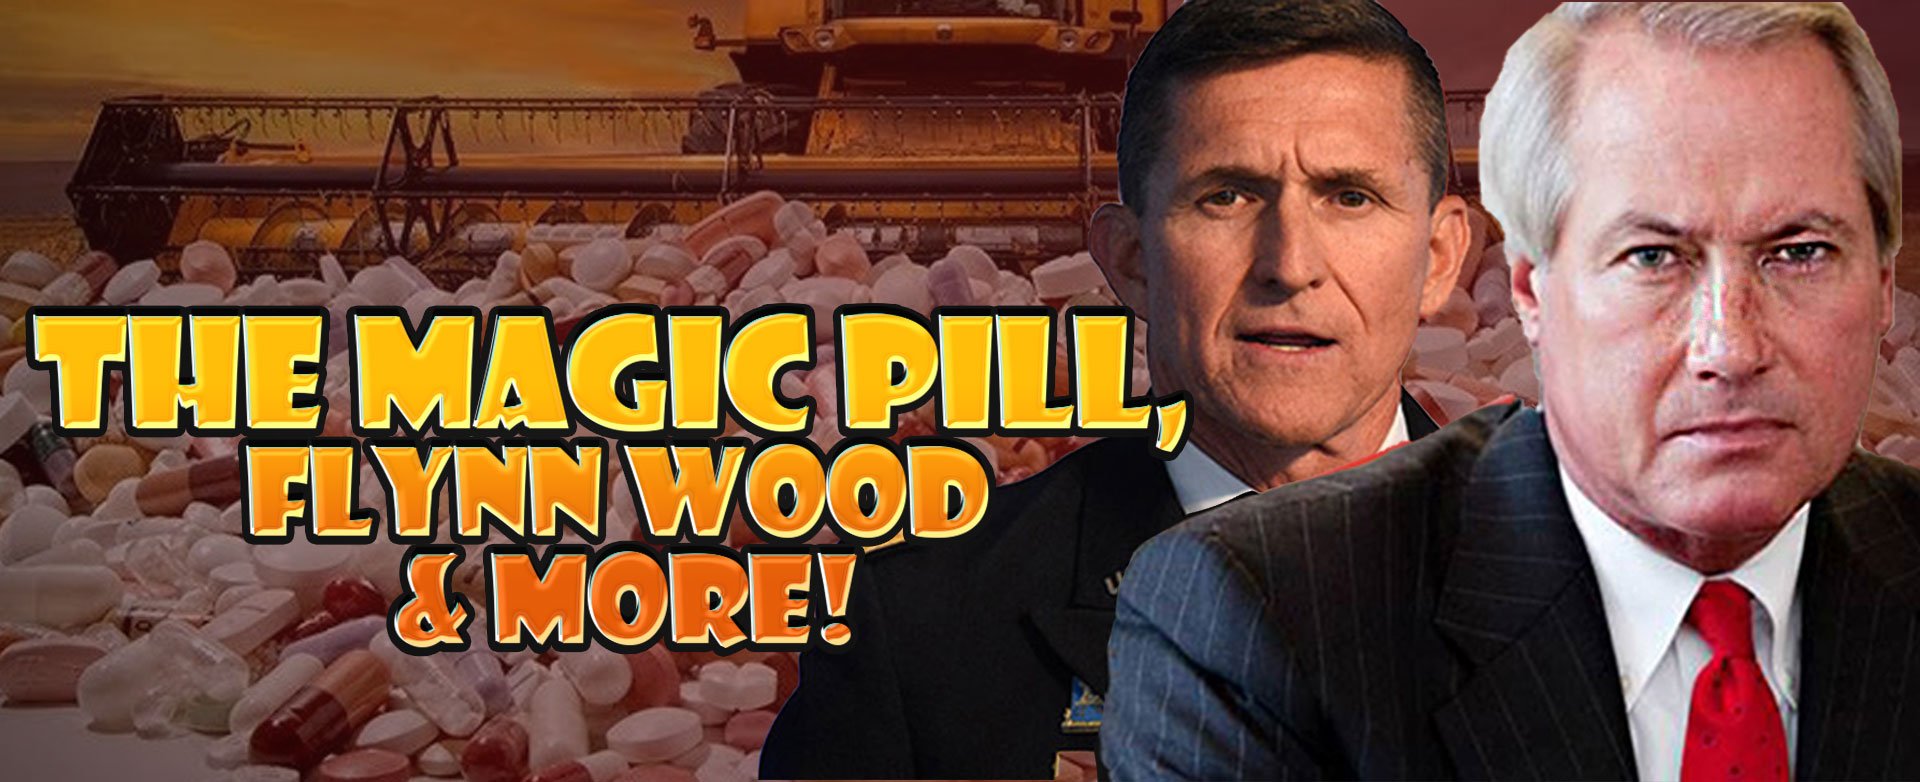 MyPatriotsNetwork-The Magic Pill, Flynn Wood & More! March 12, 2021 Update